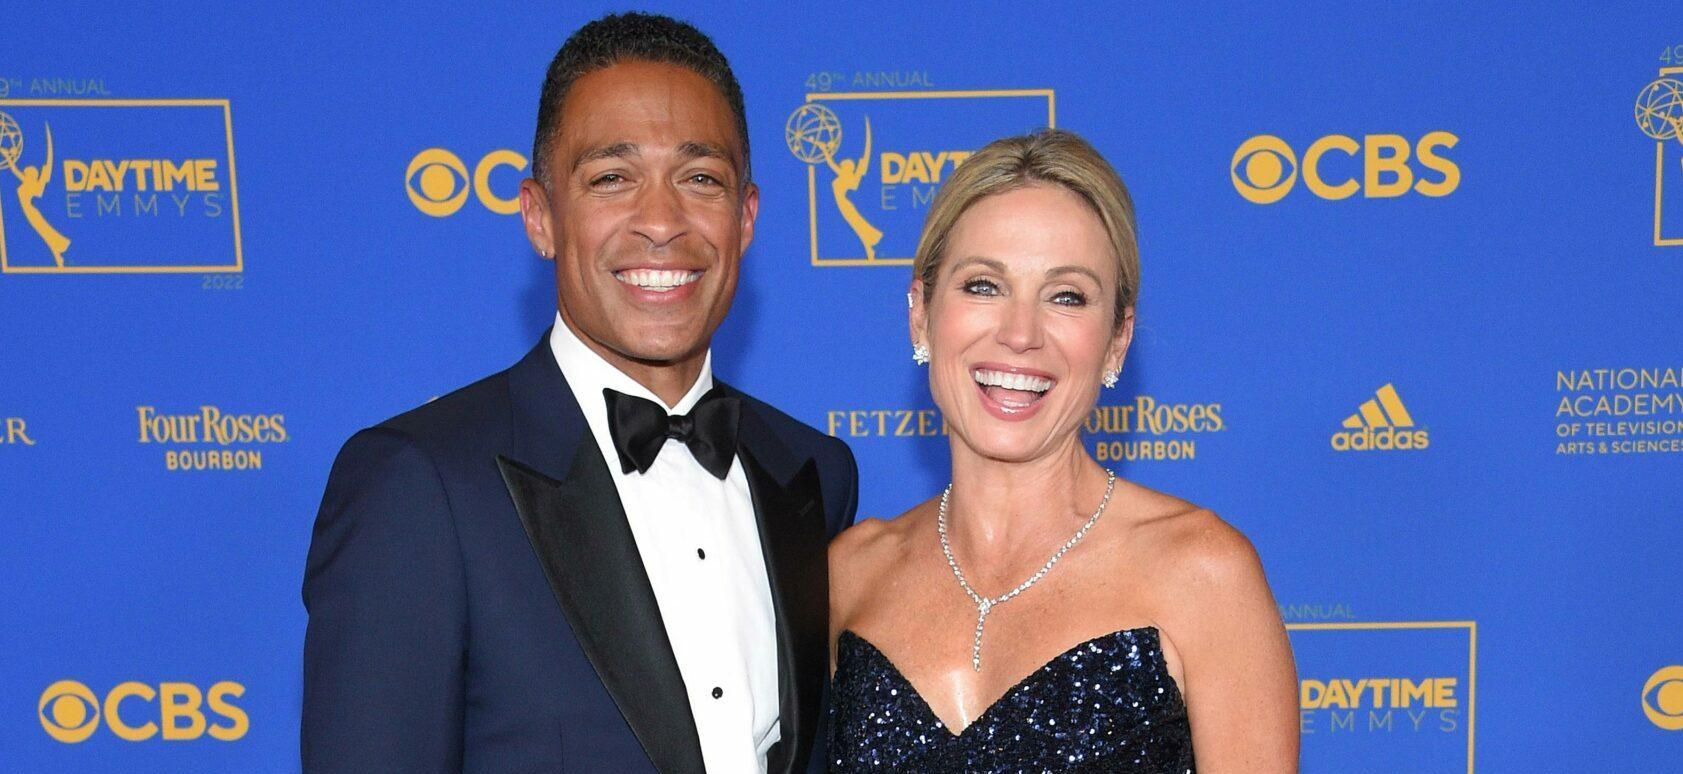 Amy Robach & T.J. Holmes’ Podcast Ratings Face Major Decline Despite Bombshell Revelations